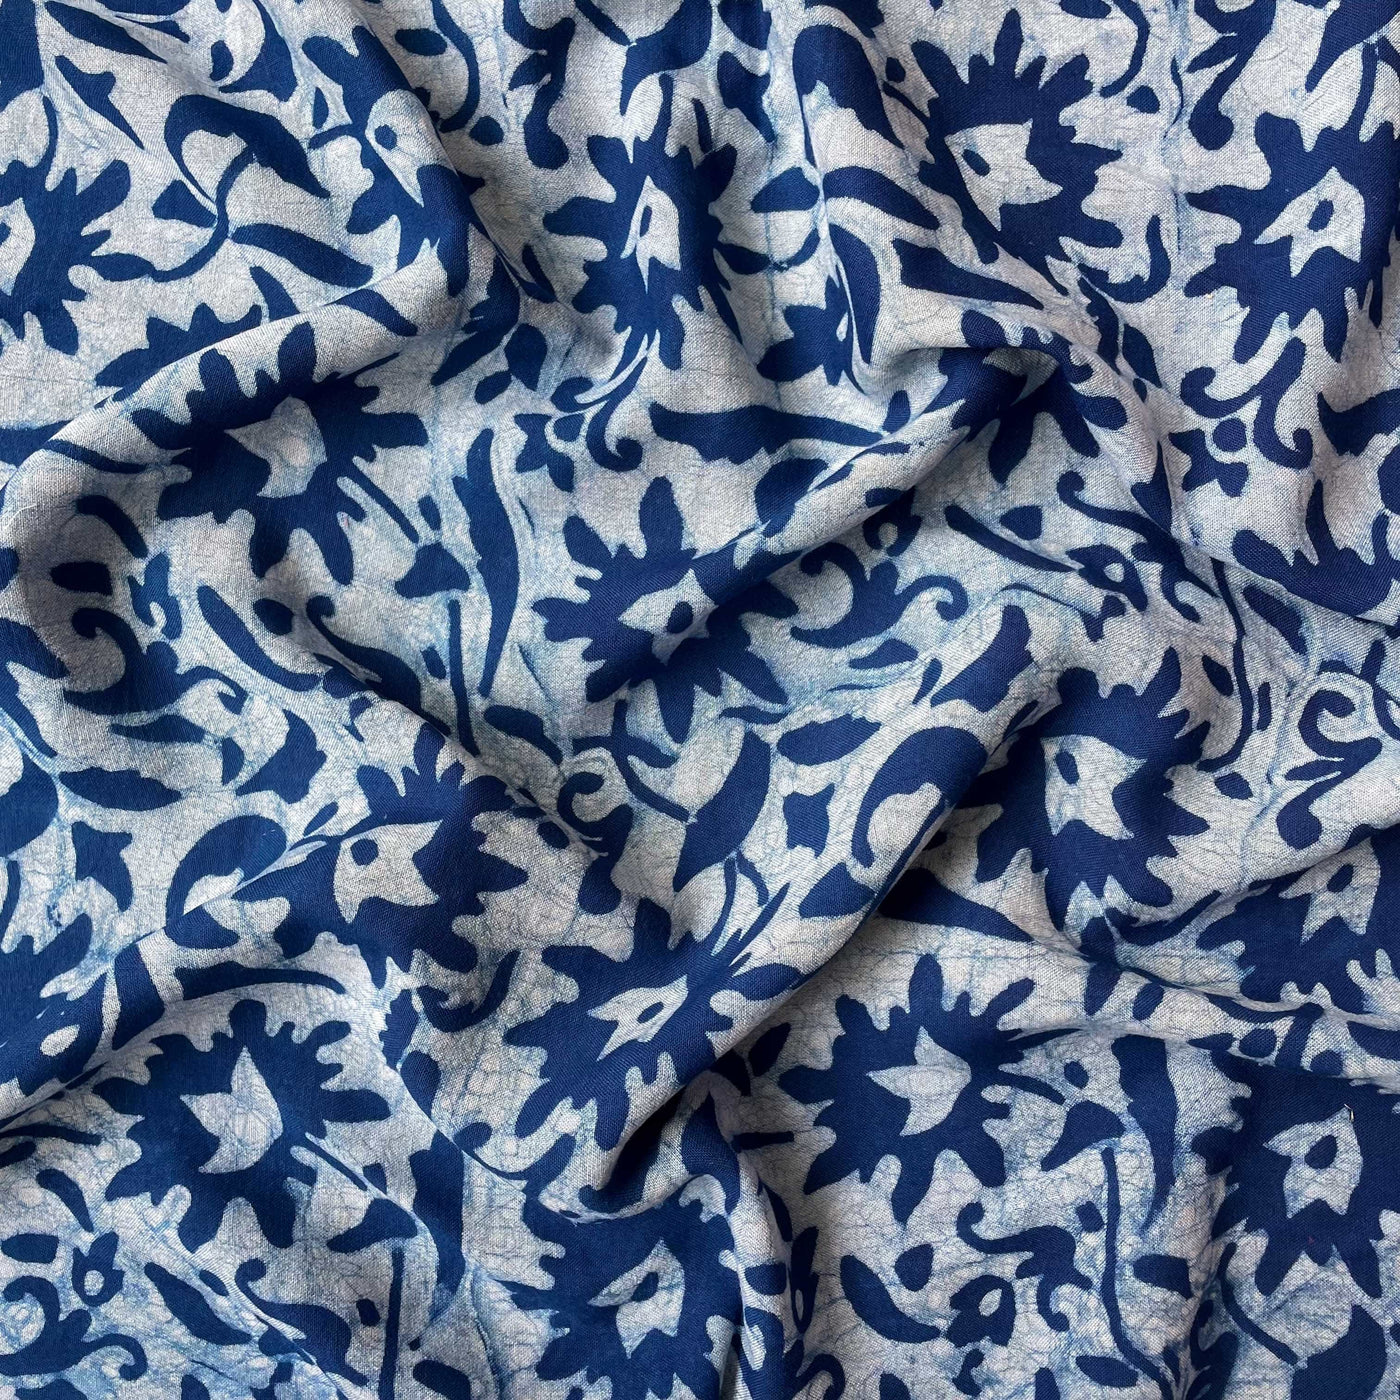 Hand Block Printed Cotton Fabric Fabric Indigo Dabu Natural Dyed Abstract Floral Hand Block Printed Rayon Fabric (Width 54 Inches)